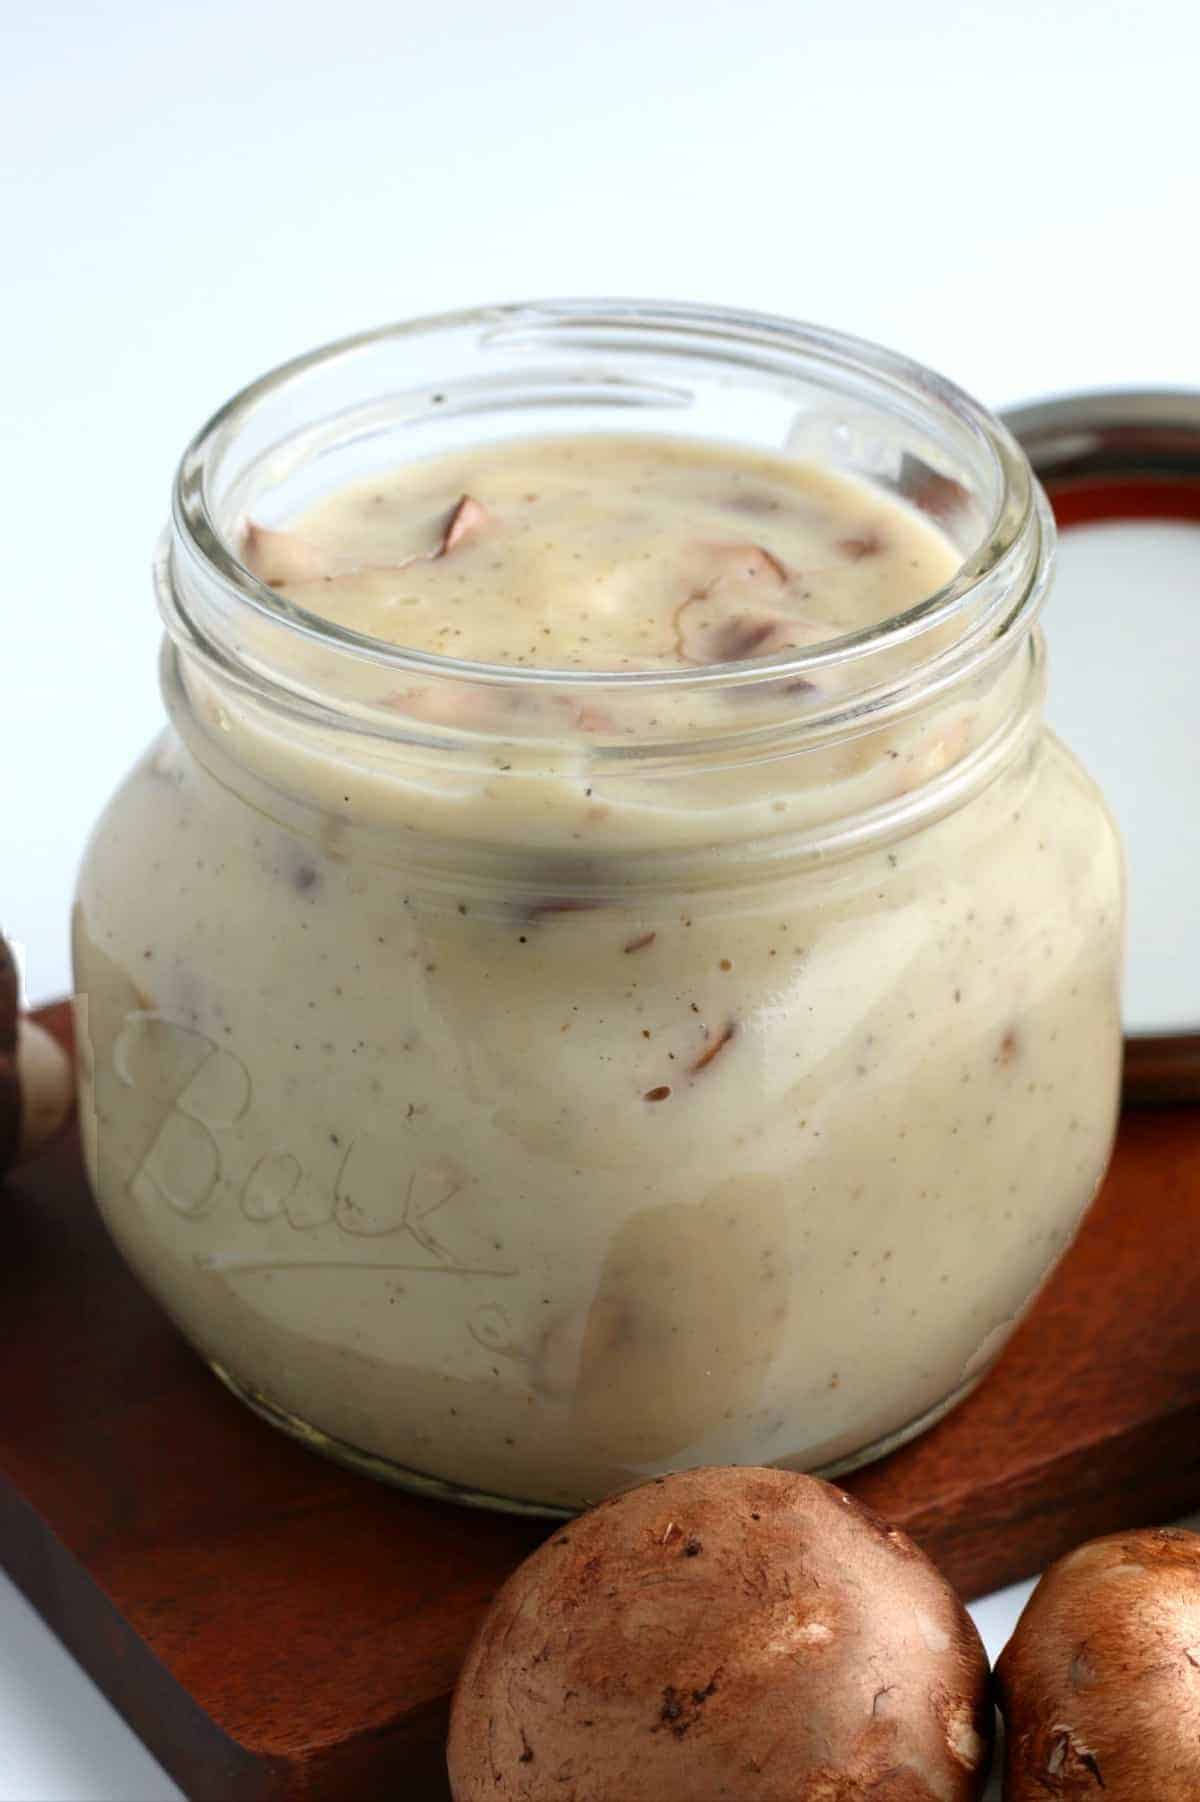 Pint jar filled with homemade comfort food with mushrooms on the side.